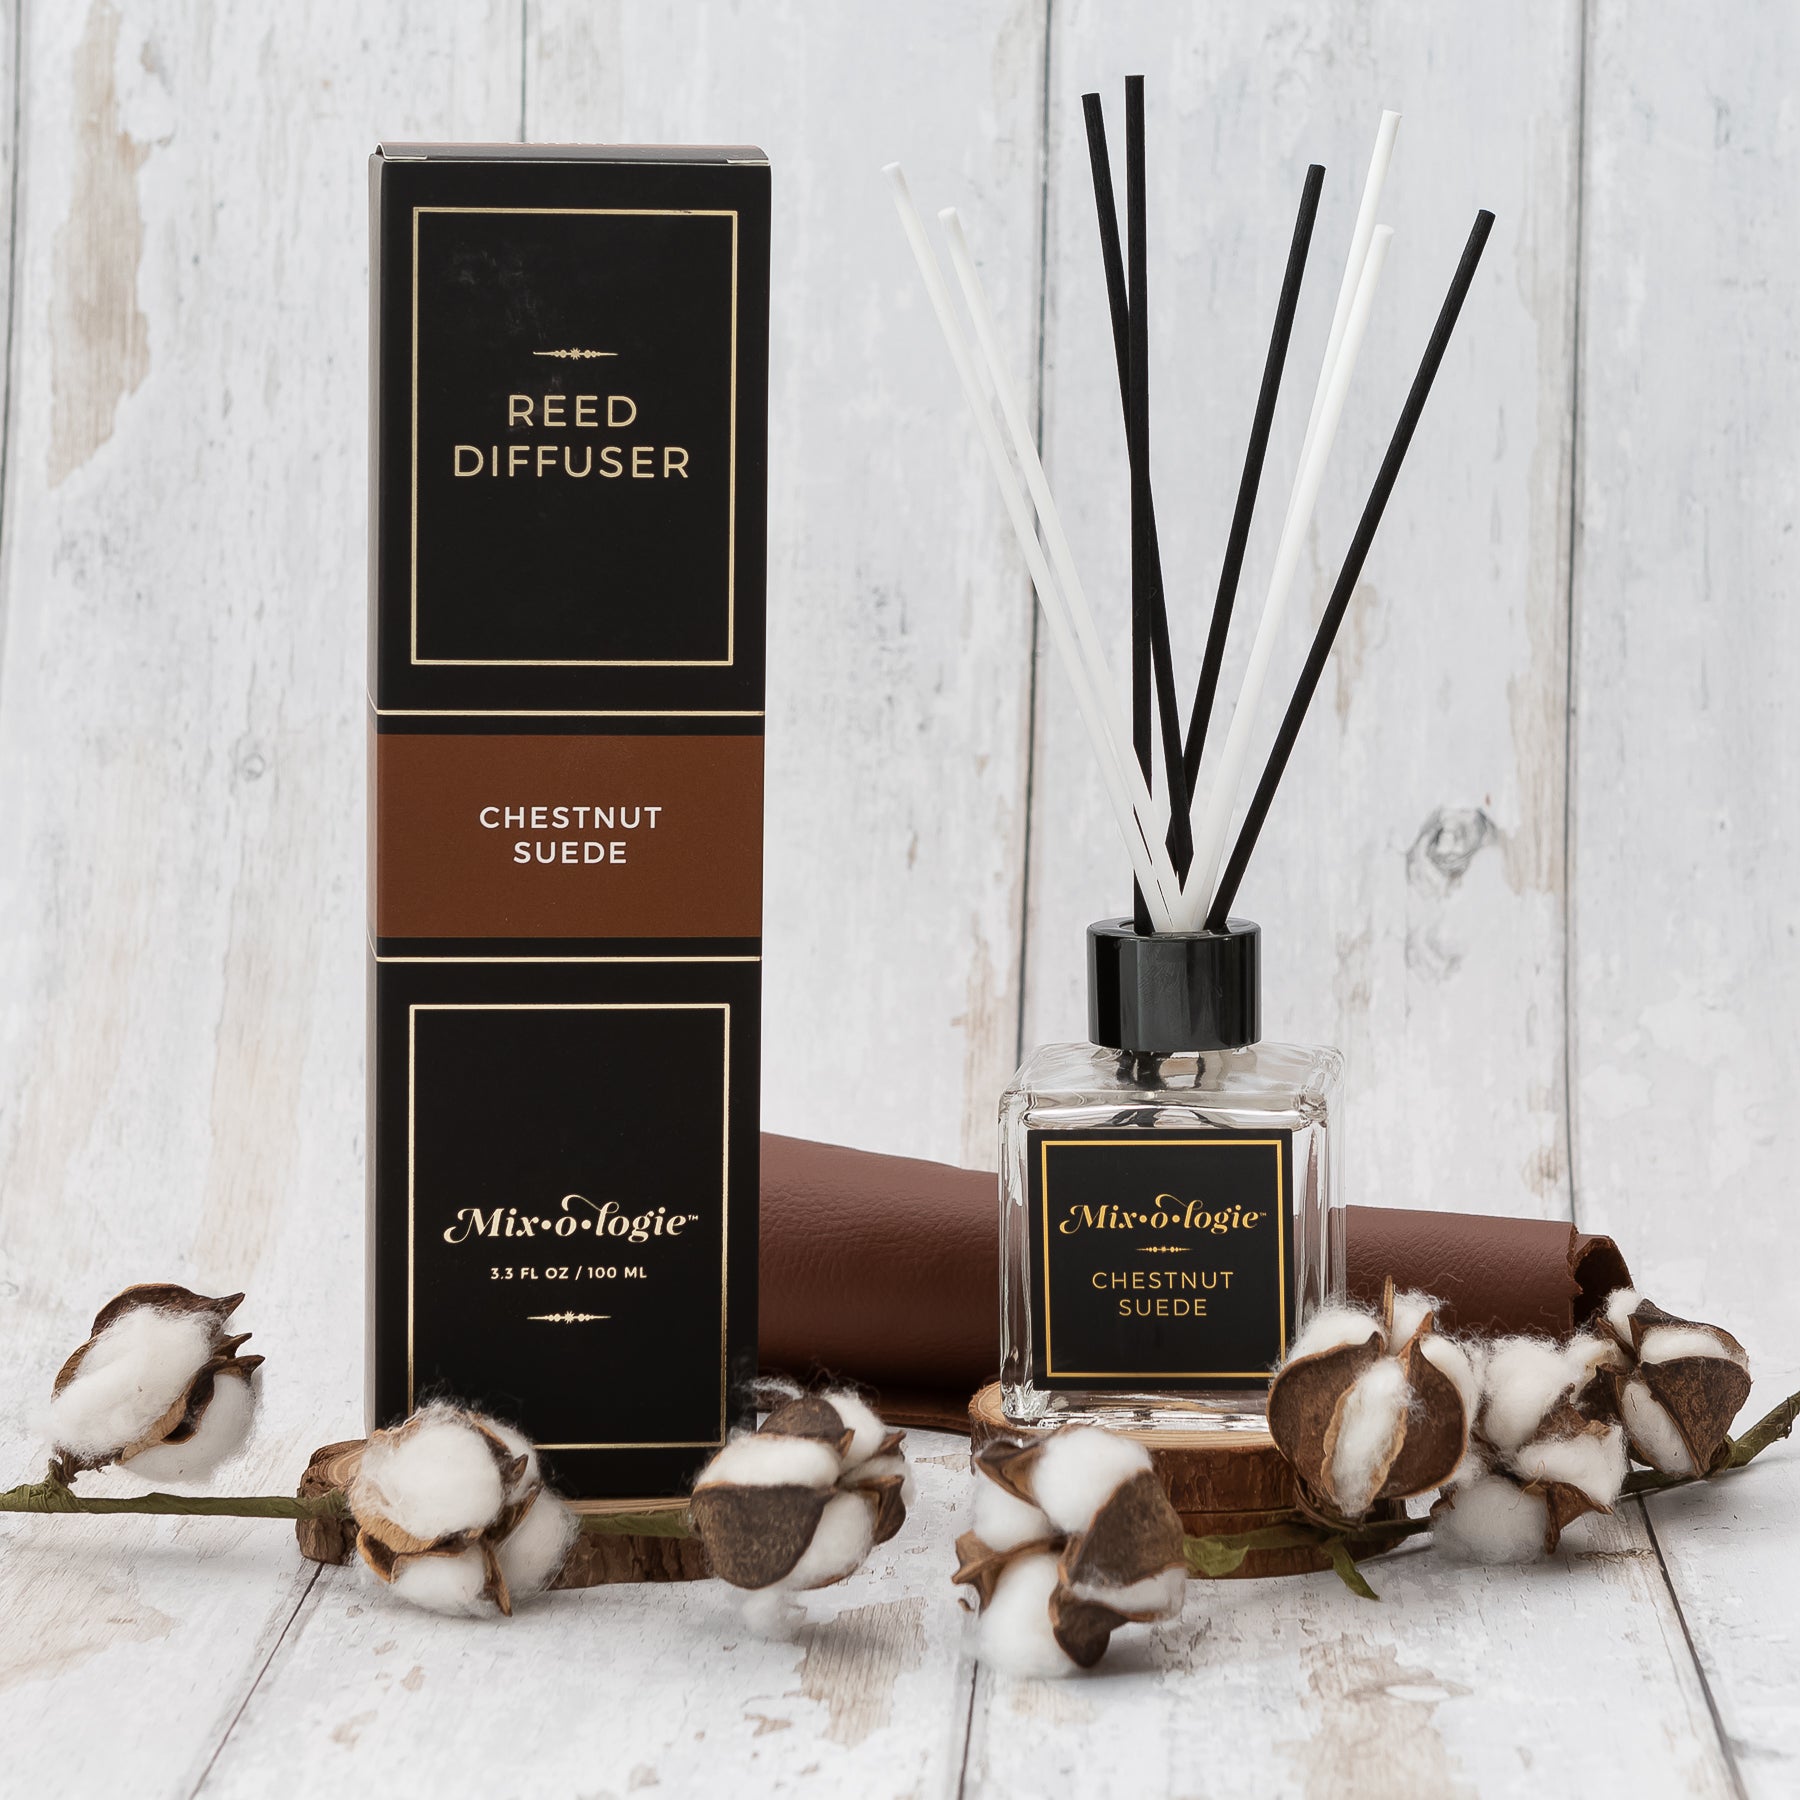 100 mL glass bottle reed diffuser scented with Mixologie's Chestnut Suede with 8 reed sticks. 